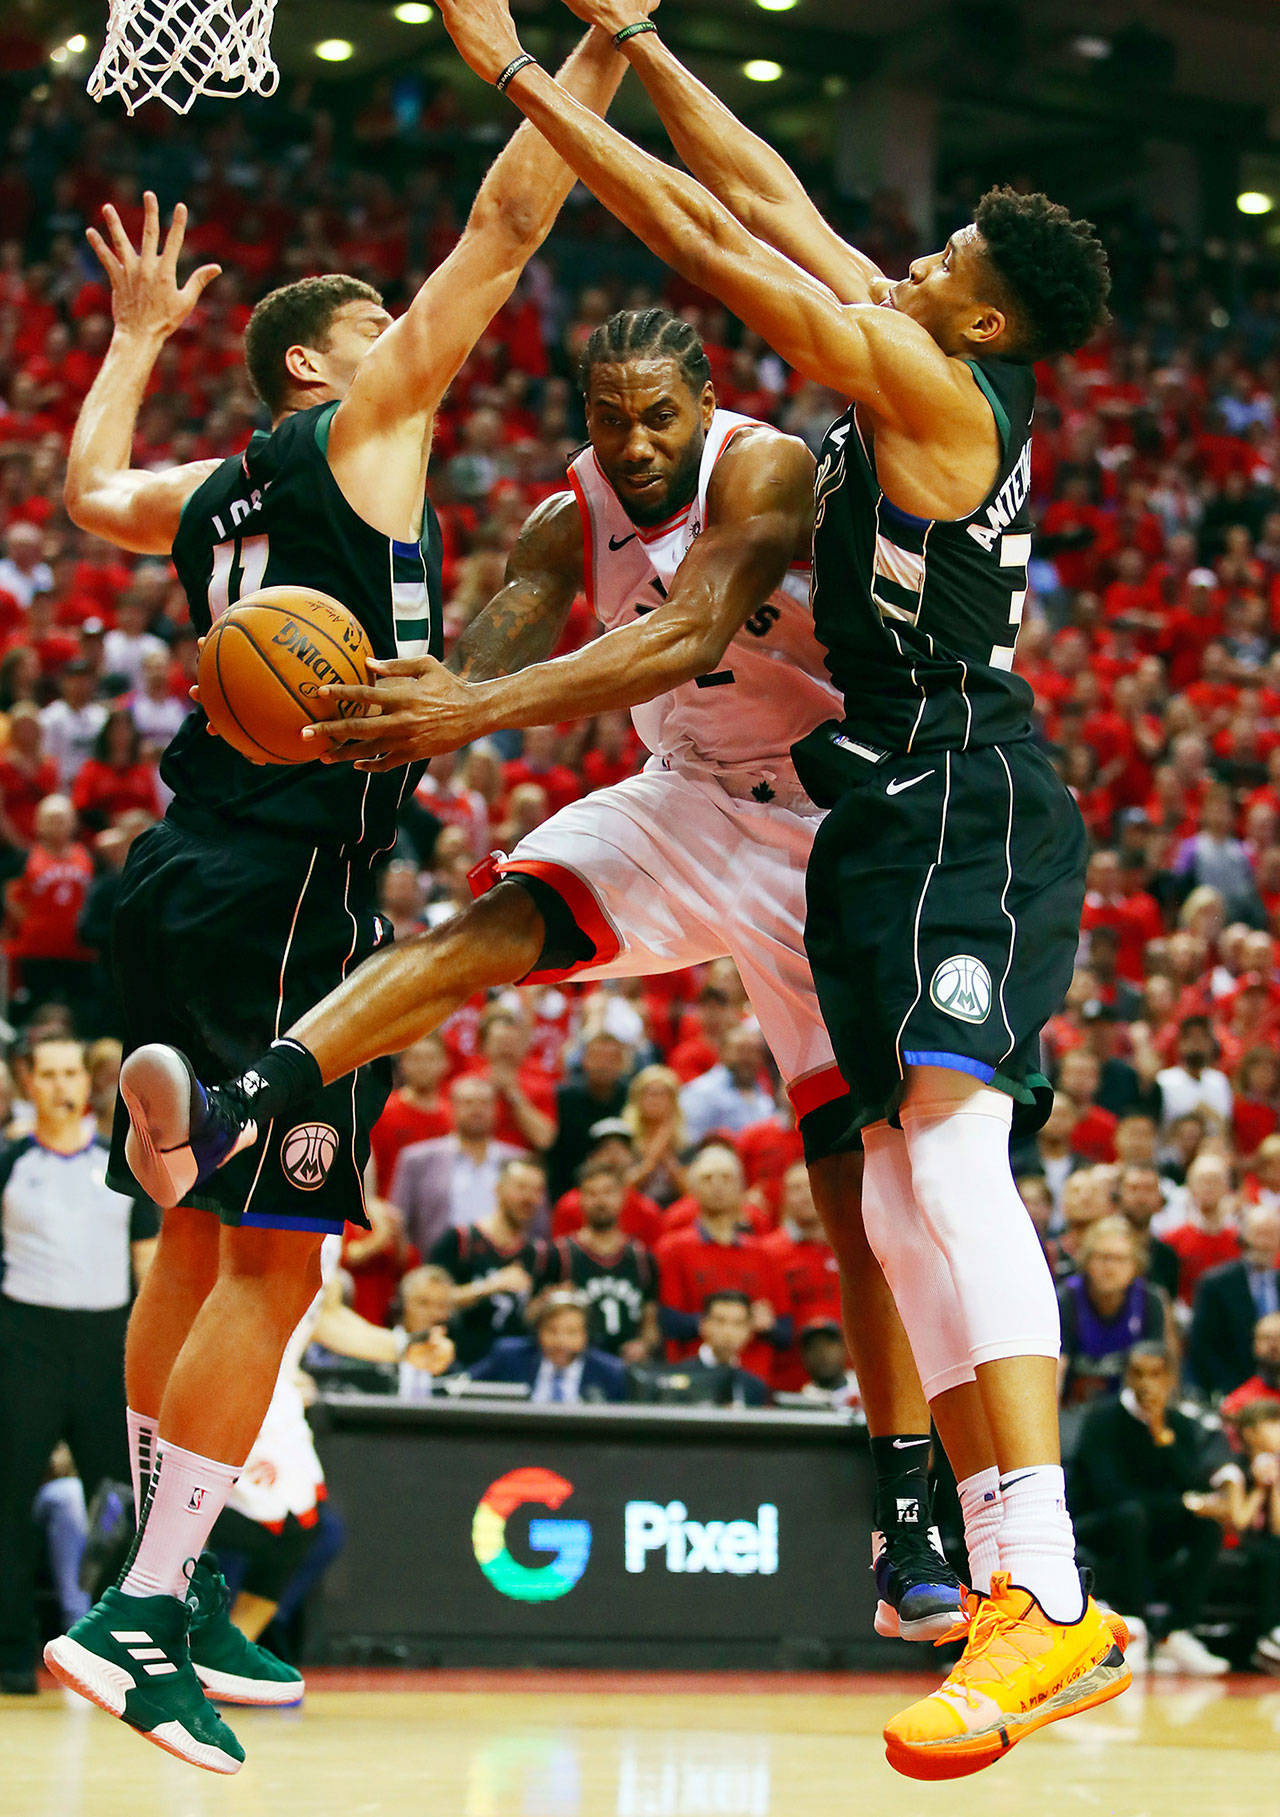 Kawhi Leonard of the Toronto Raptors handles the ball during the second half against the Milwaukee Bucks in game six of the NBA Eastern Conference Finals at Scotiabank Arena on May 25. The Raptors won 100-94, sending them to the NBA Finals for the first time. (Gregory Shamus | Getty Images/TNS)